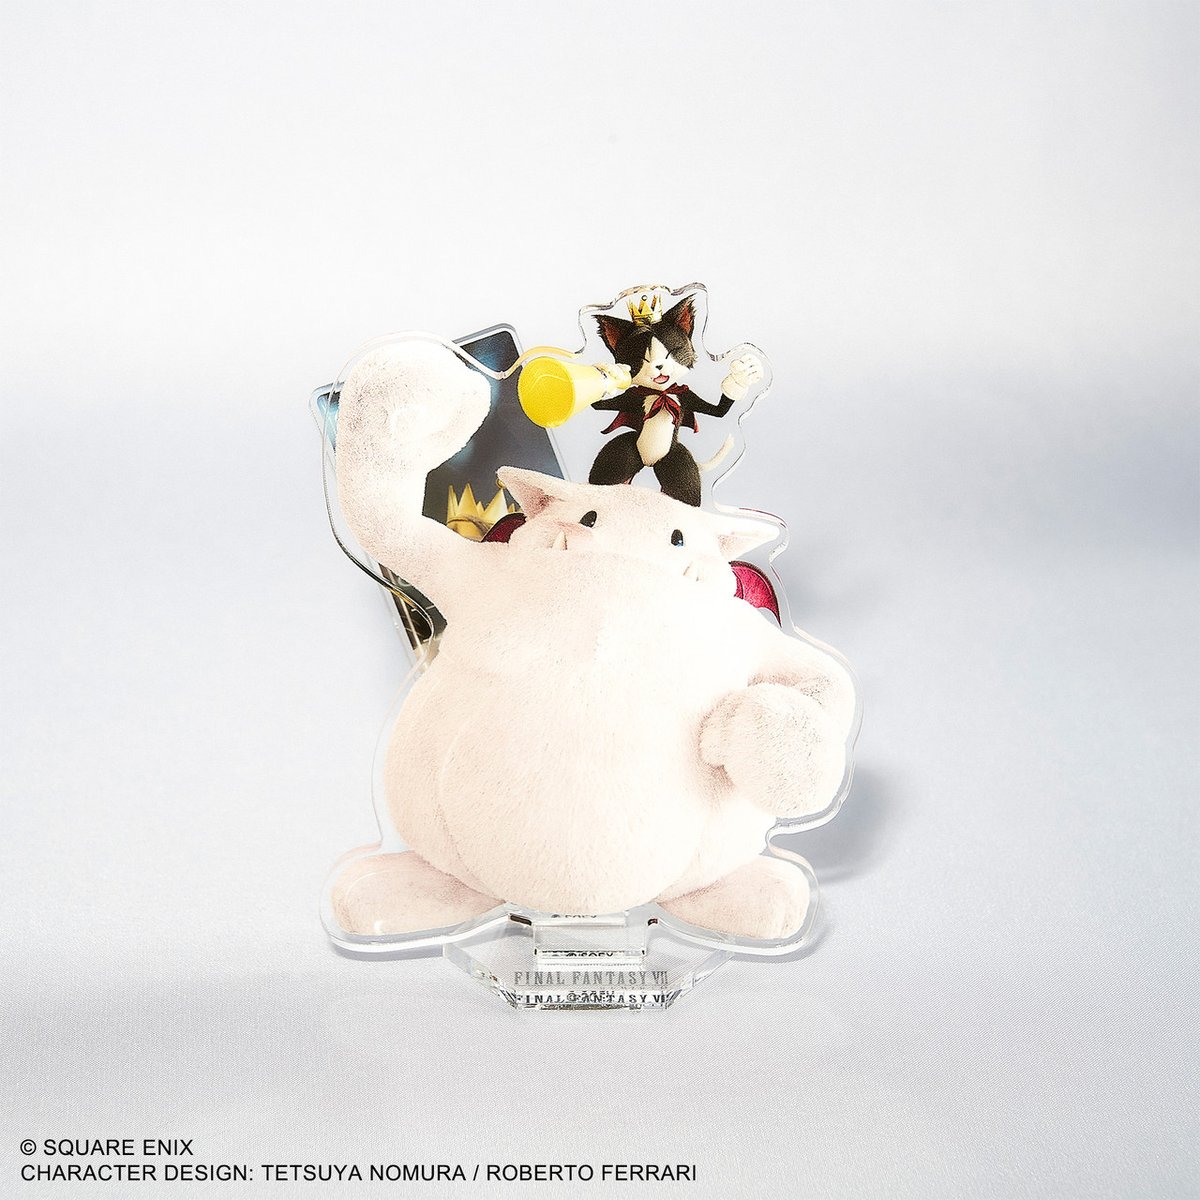 Make sure to pick up our Cait Sith & Fat Moogle acrylic stand to go along with all of your favorite characters from @finalfantasyvii REBIRTH! sqex.link/yyn2